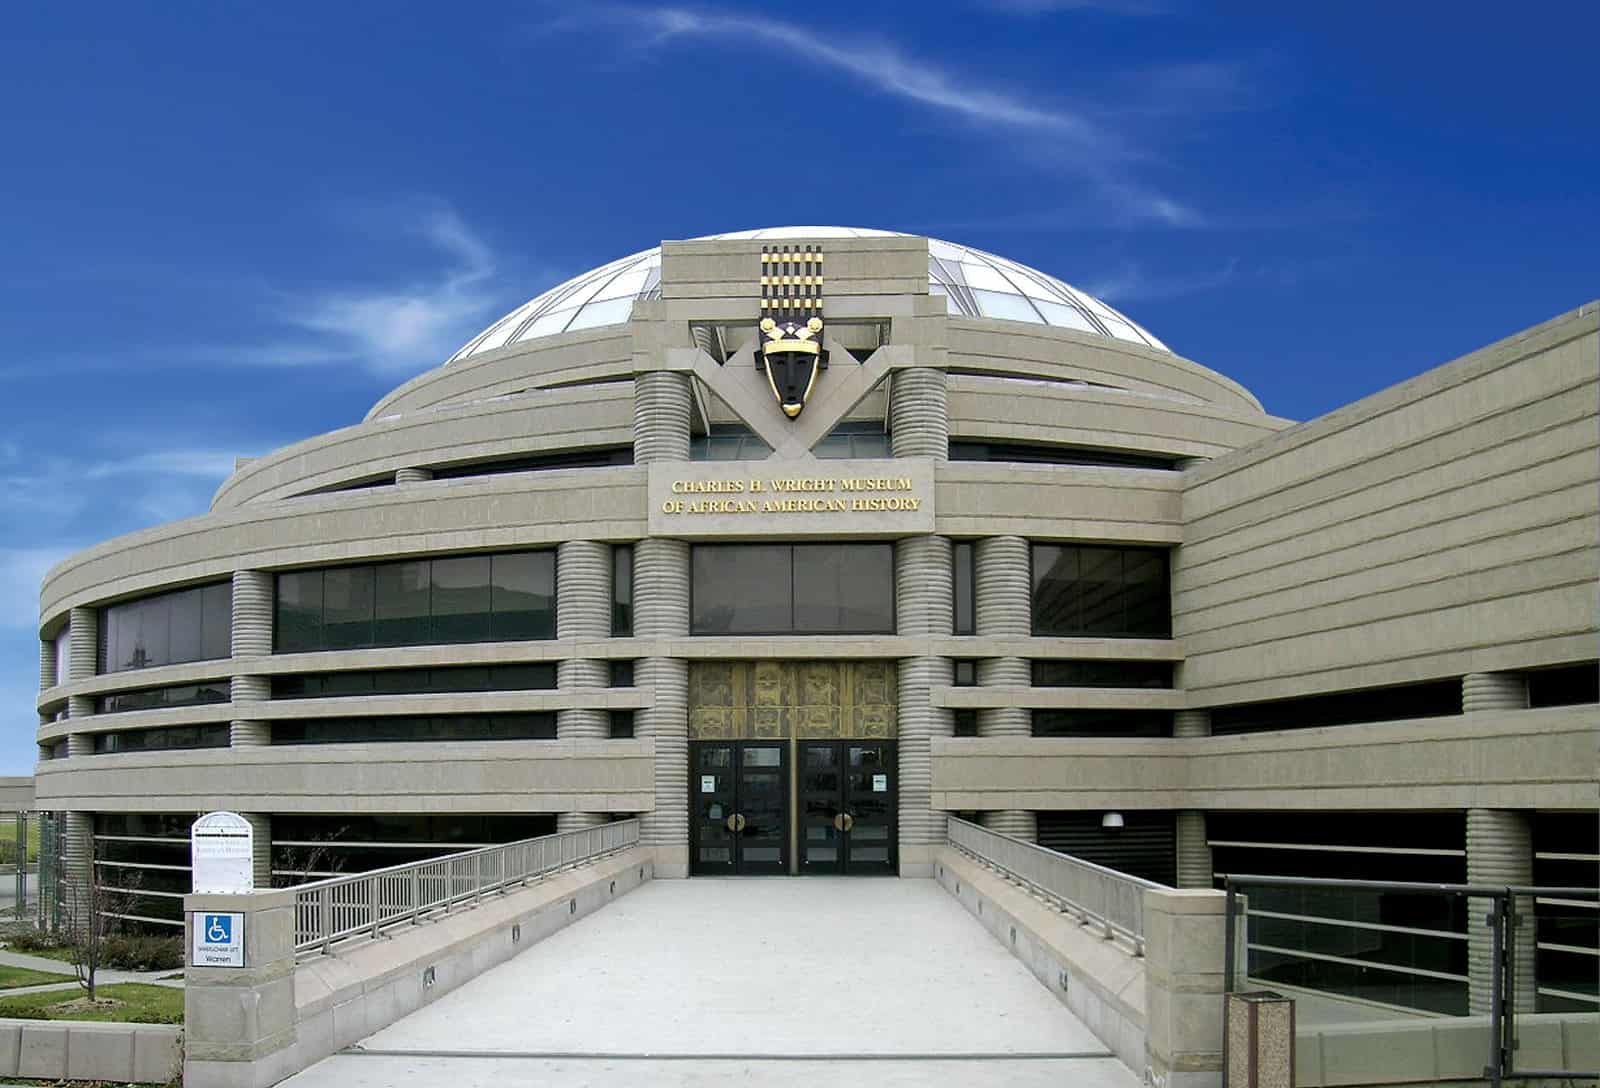 Charles H Wright Museum of African American History